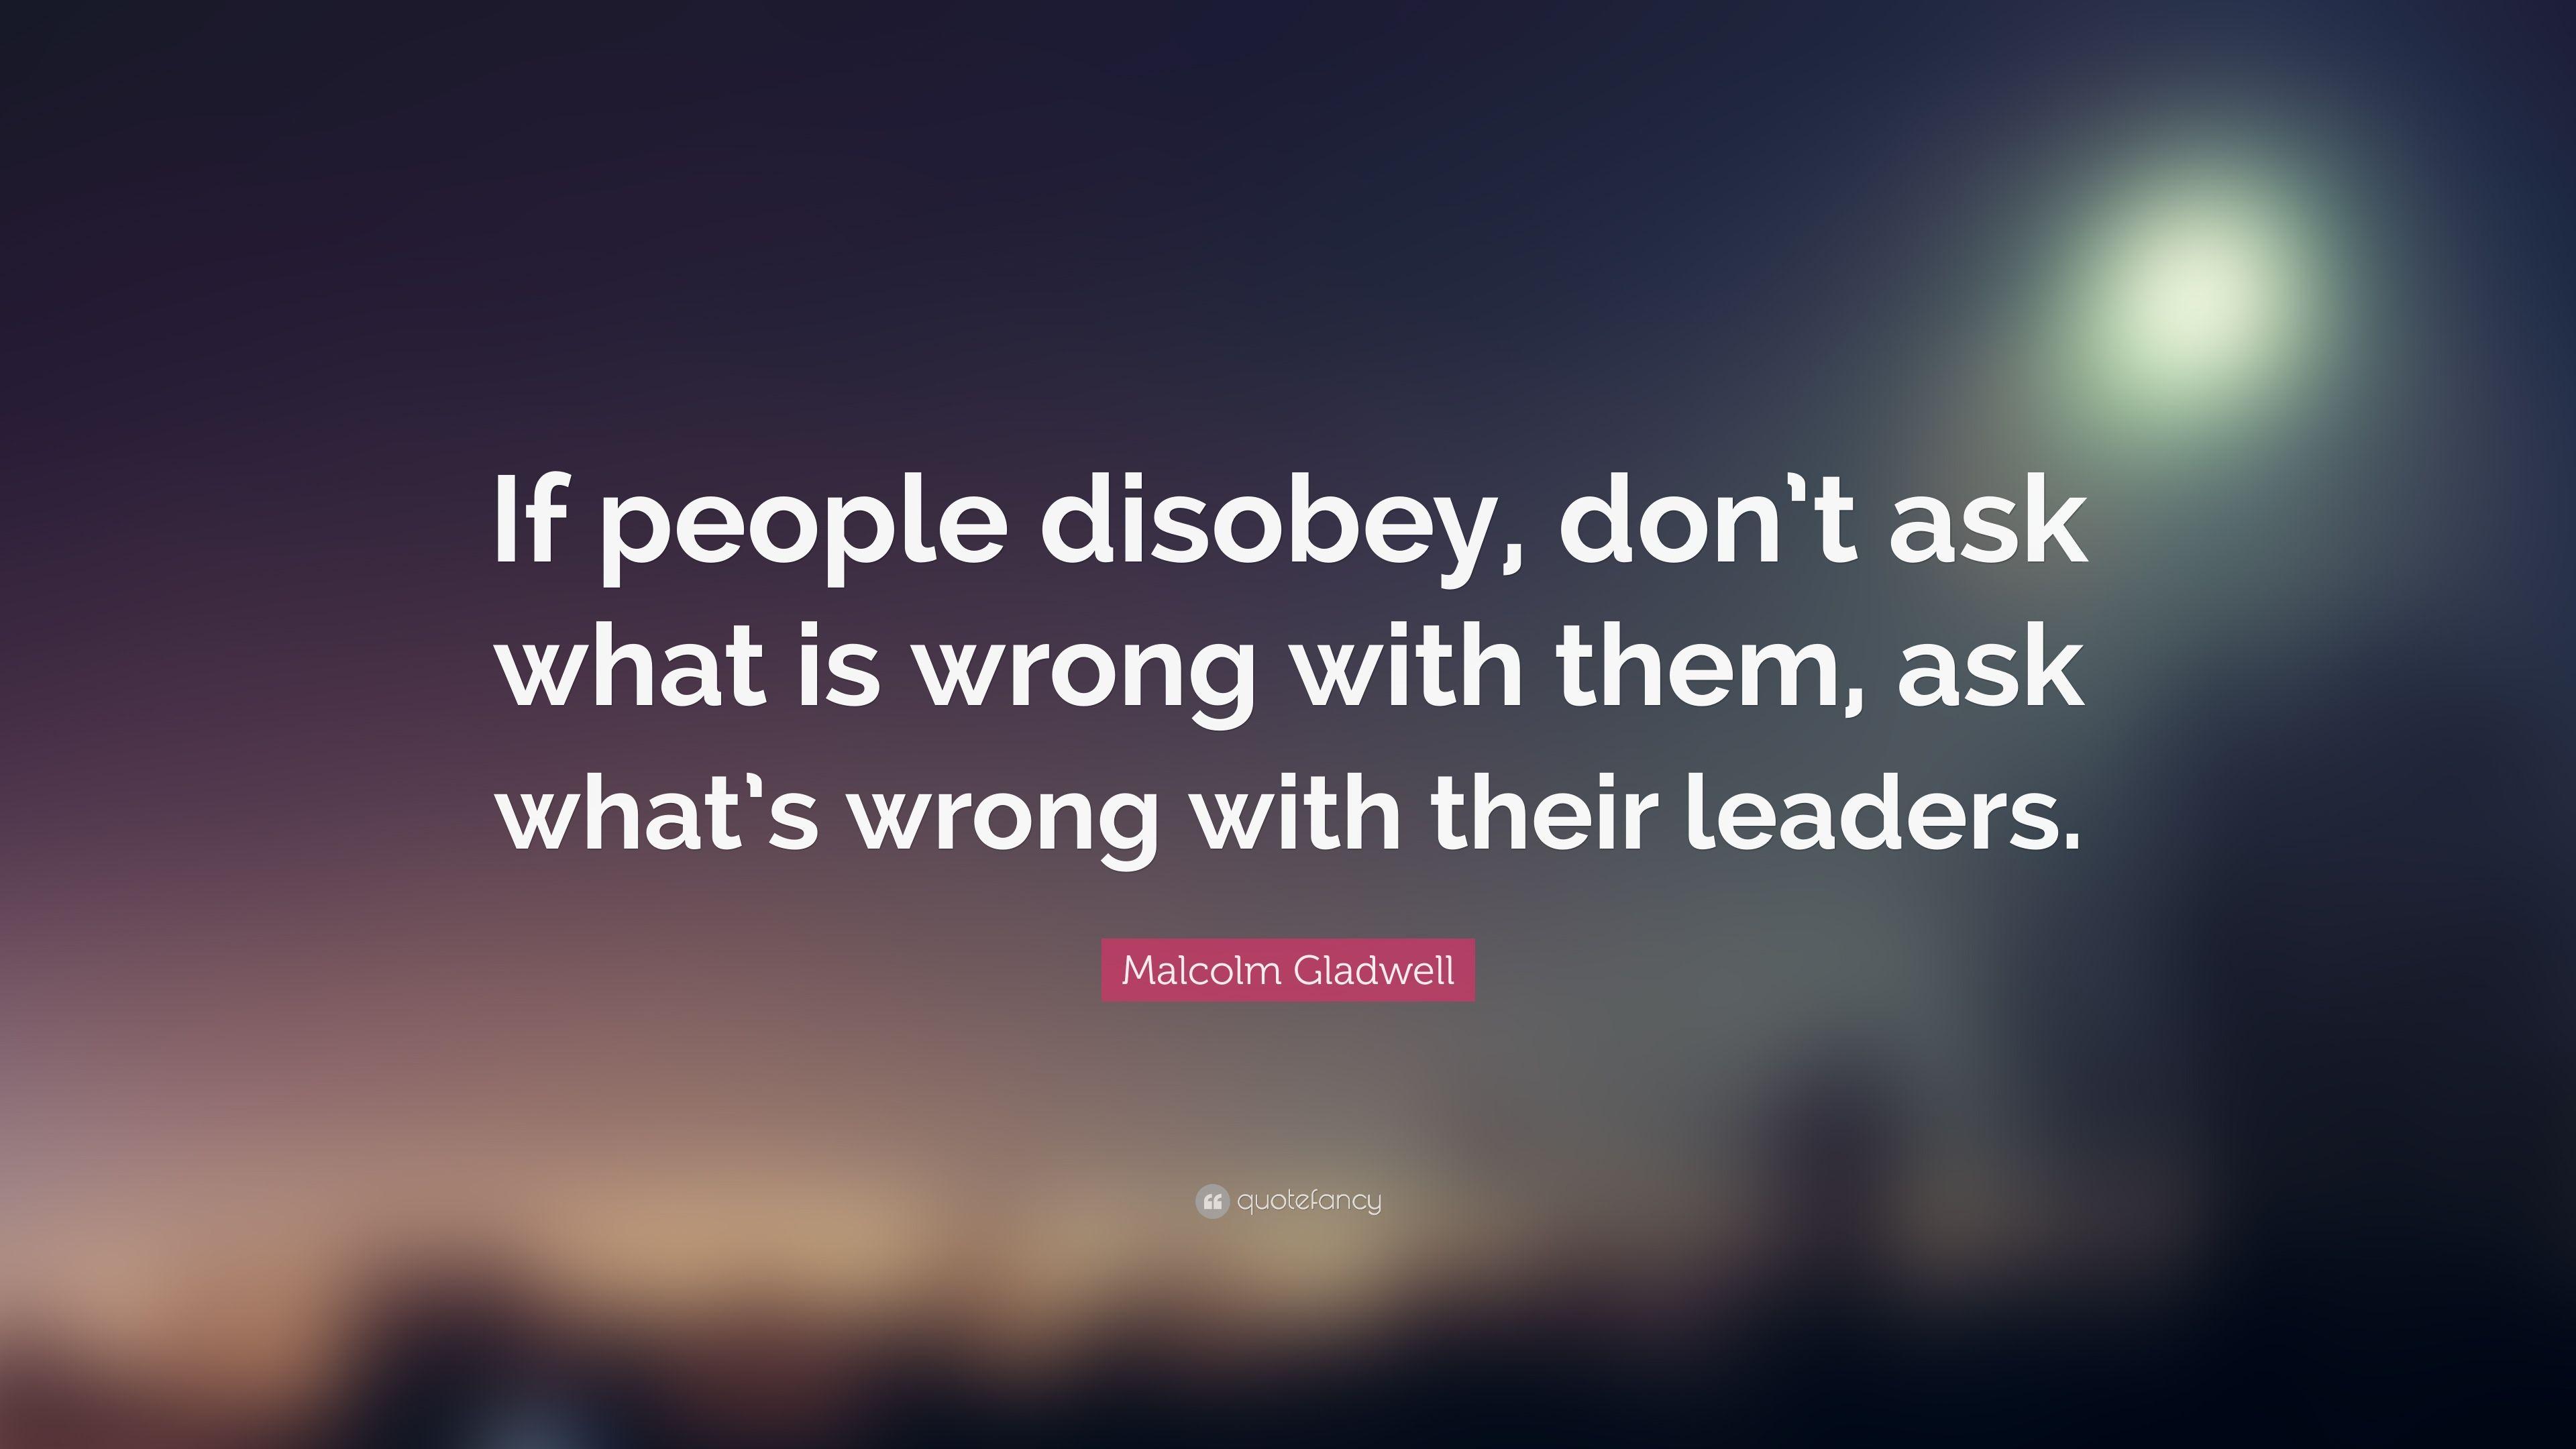 Malcolm Gladwell Quote: “If people disobey, don't ask what is